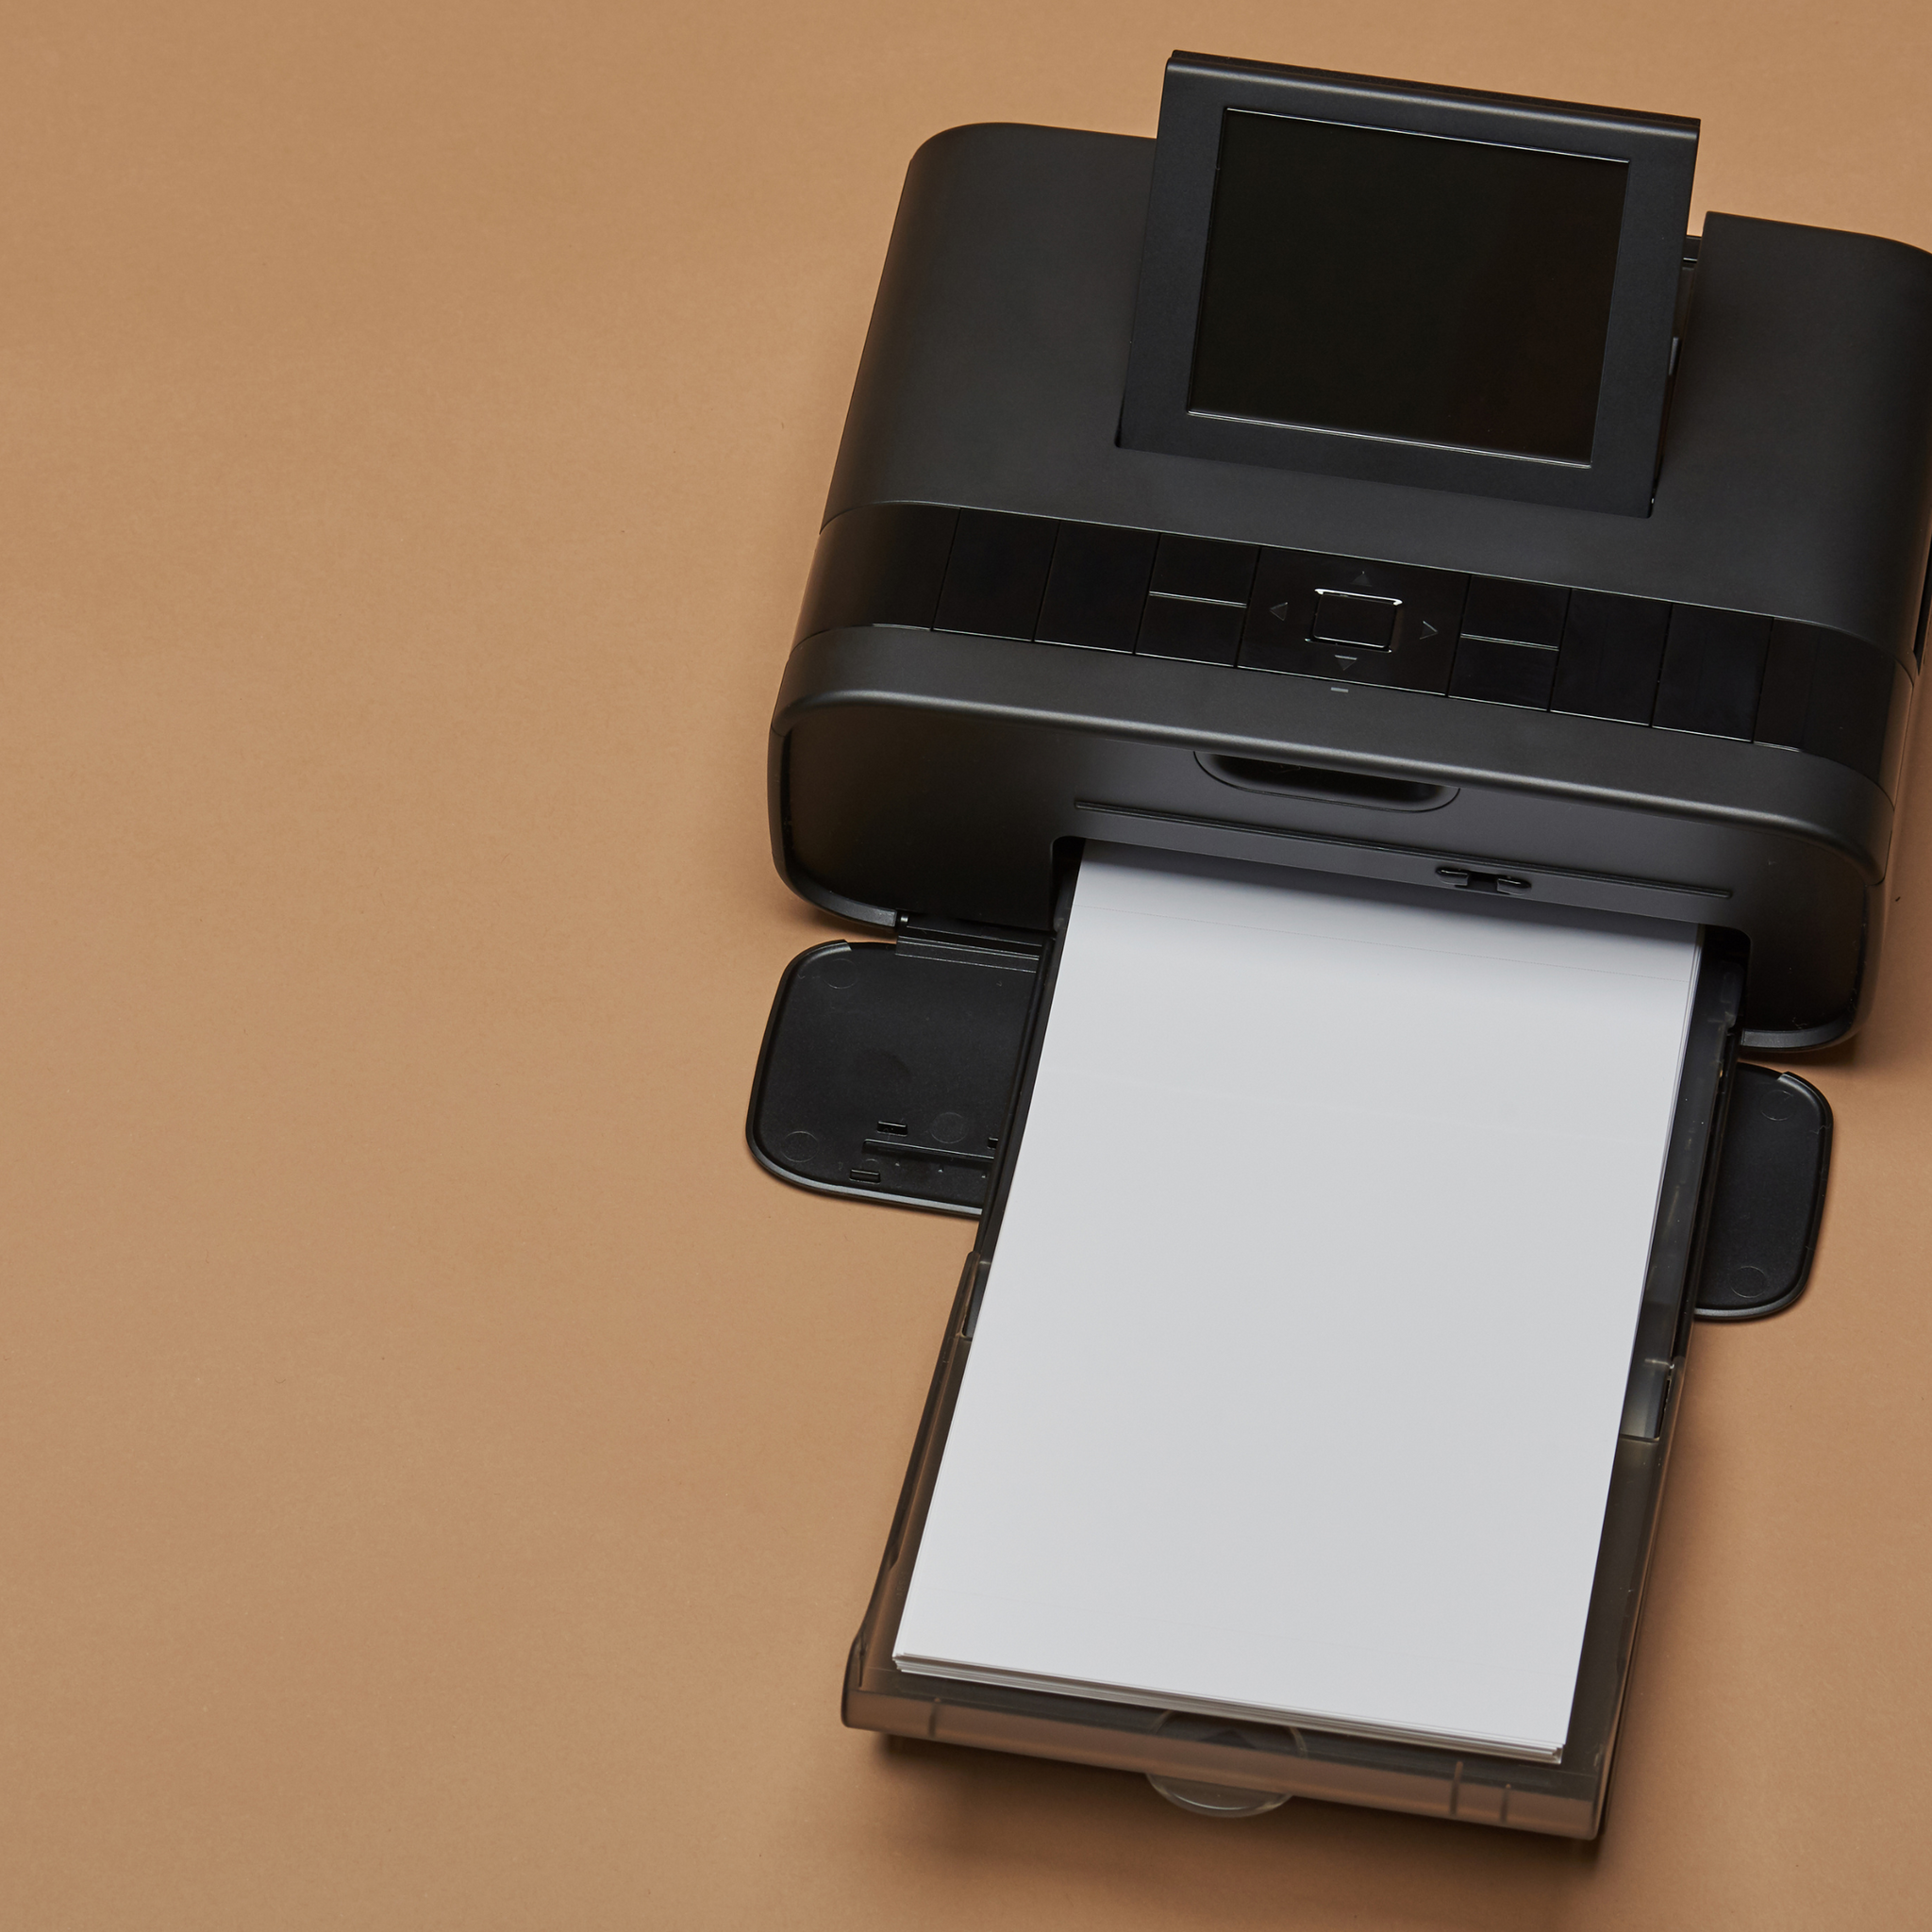 Printing Without Boundaries: Unleashing Creativity with the Mini Portable A4 Printer from DigiLifePlus